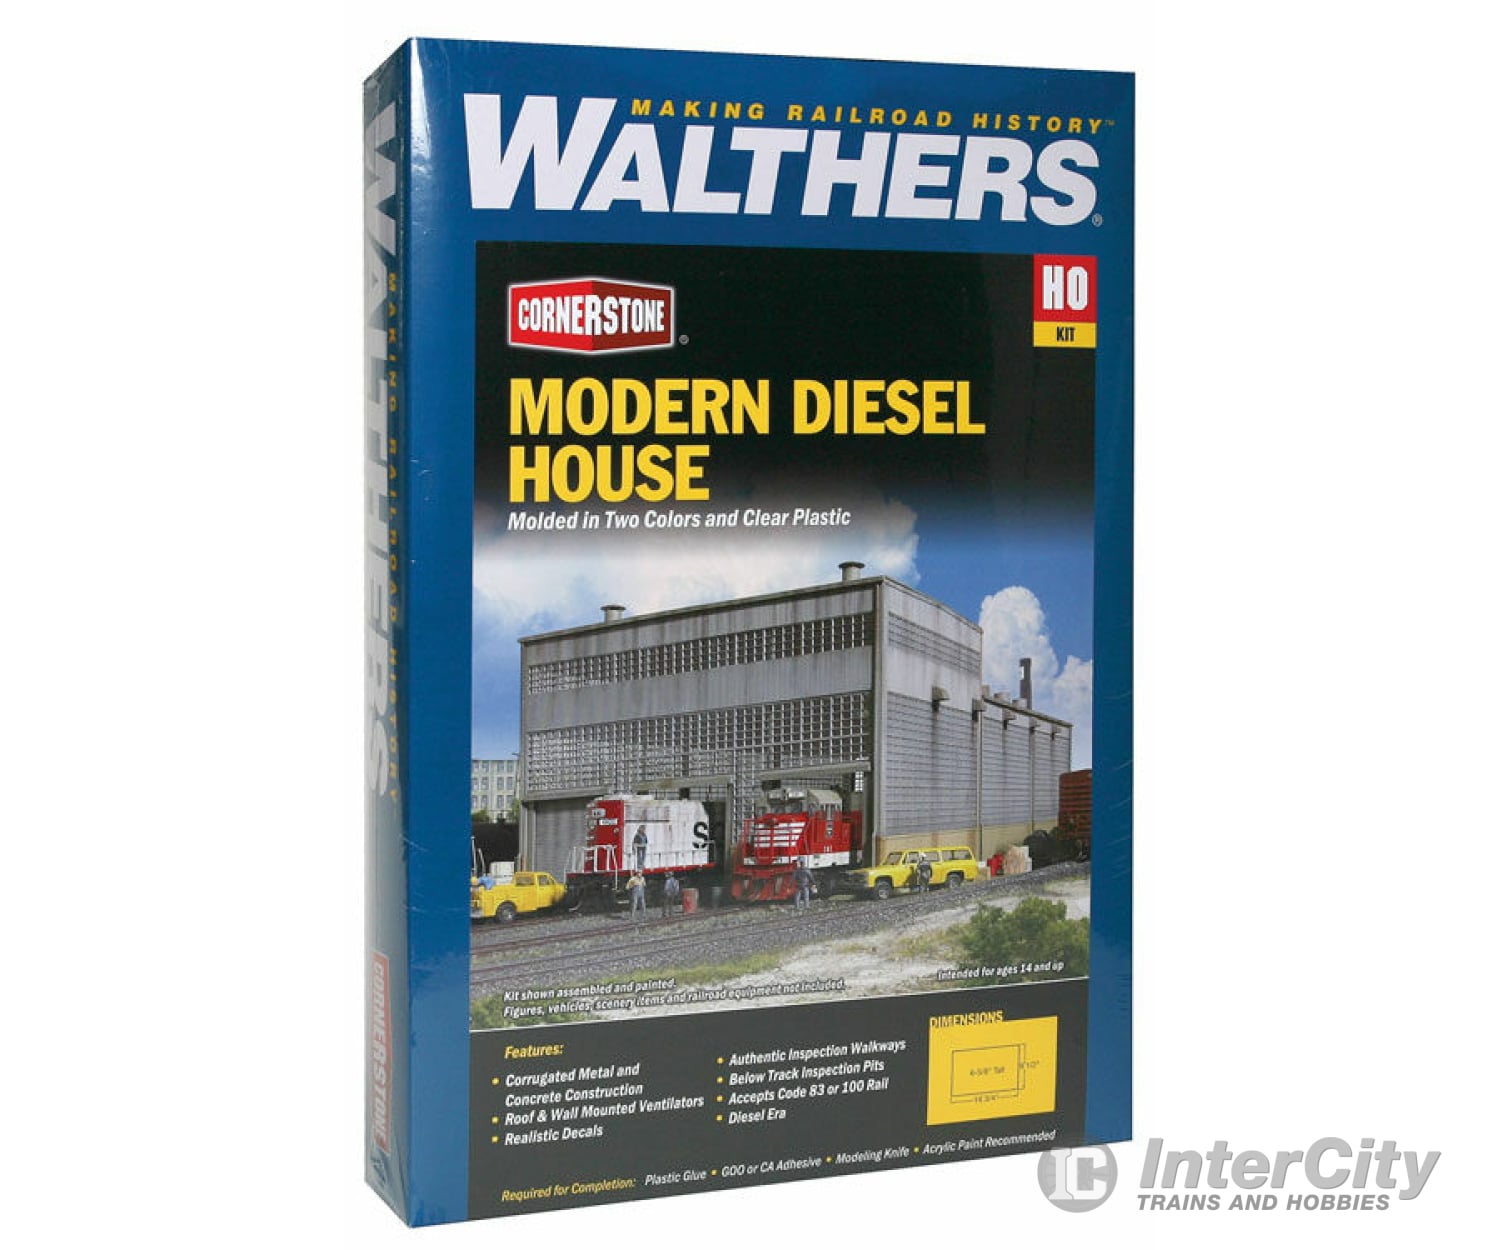 Walthers Cornerstone Ho 2916 Diesel House -- Kit - 9-1/4 X 16-7/8 6-1/2 23.5 42.8 16.4Cm Structures